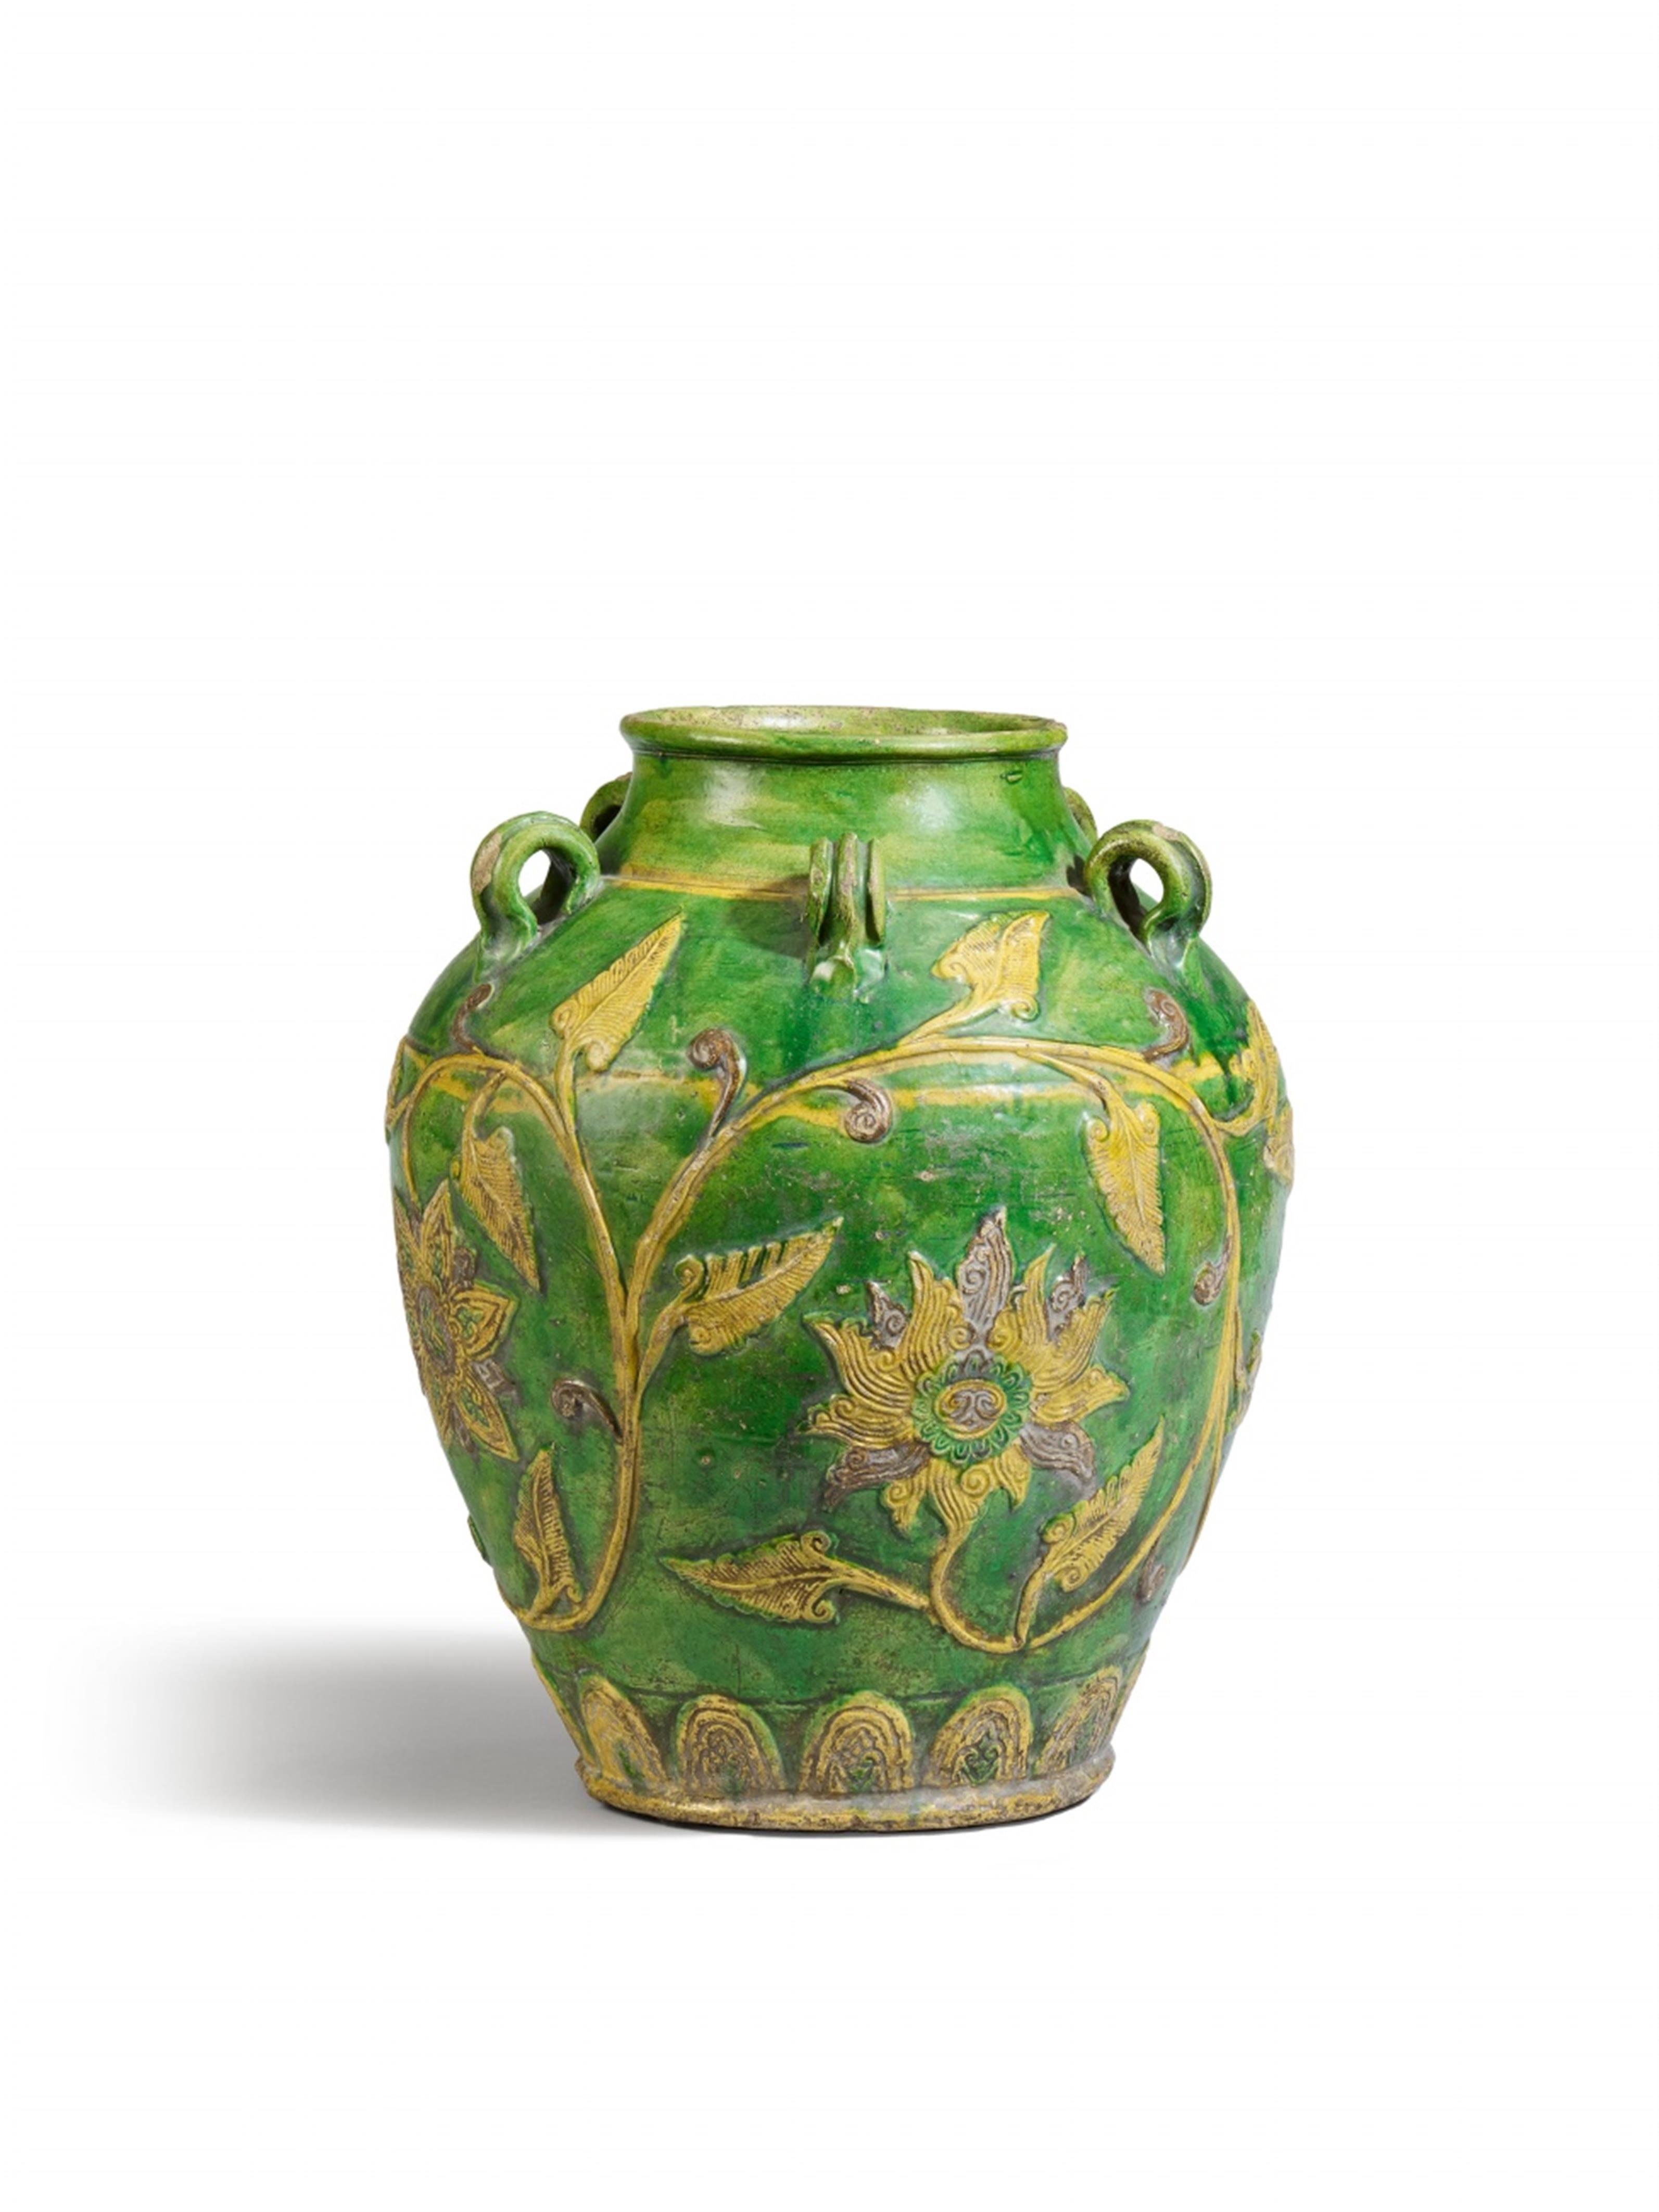 A green, yellow and brown-glazed "Tradescant" storage jar. Ming dynasty (1368-1644), around 1600 - image-1